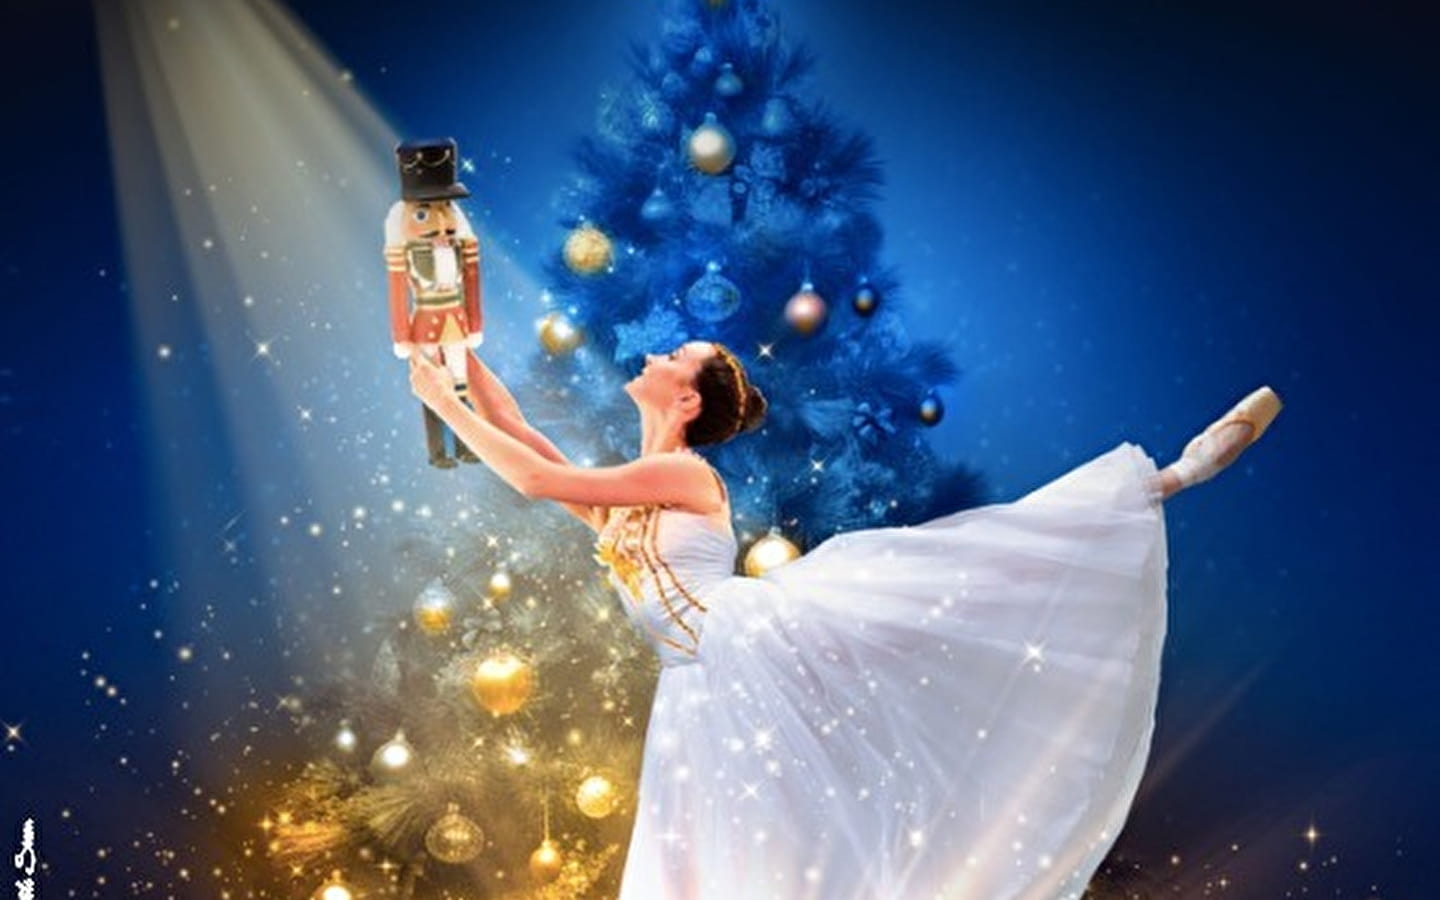 Cancelled! The Nutcracker, a fairytale ballet! postponed until January 2025